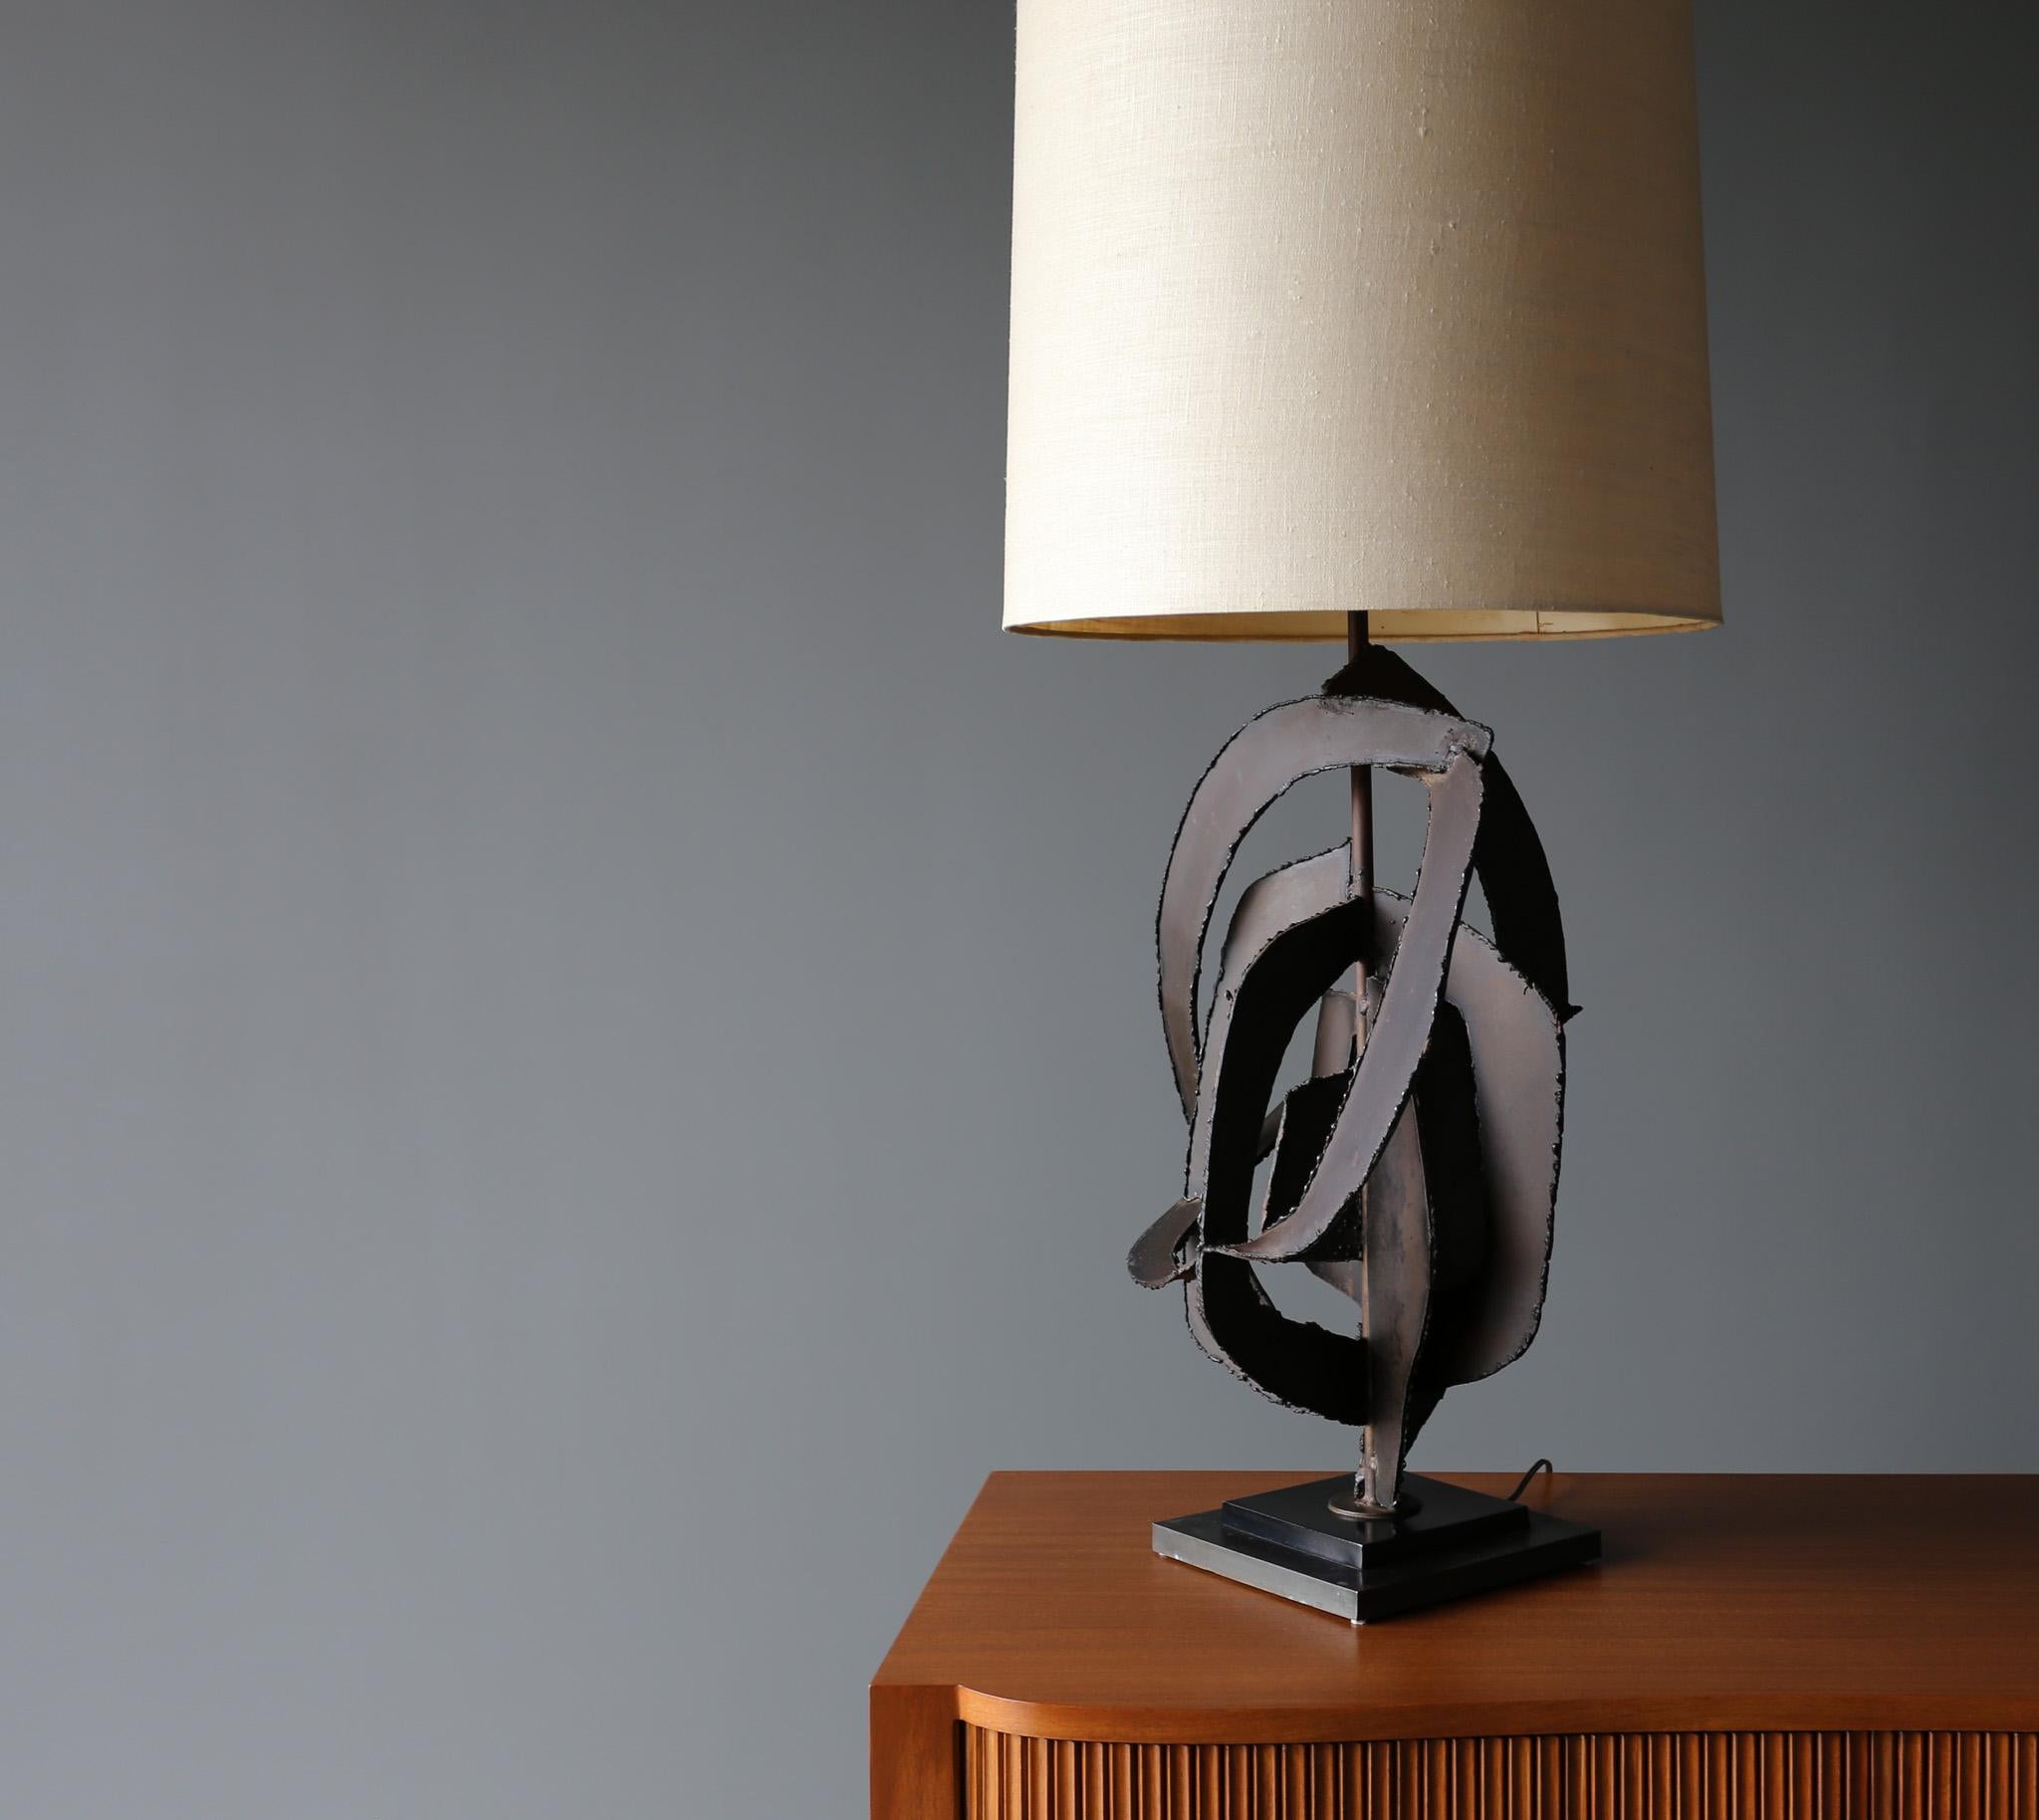 20th Century Richard Barr Sculptural Table Lamp for the STUDIO Collection by Laurel, c.1965 For Sale